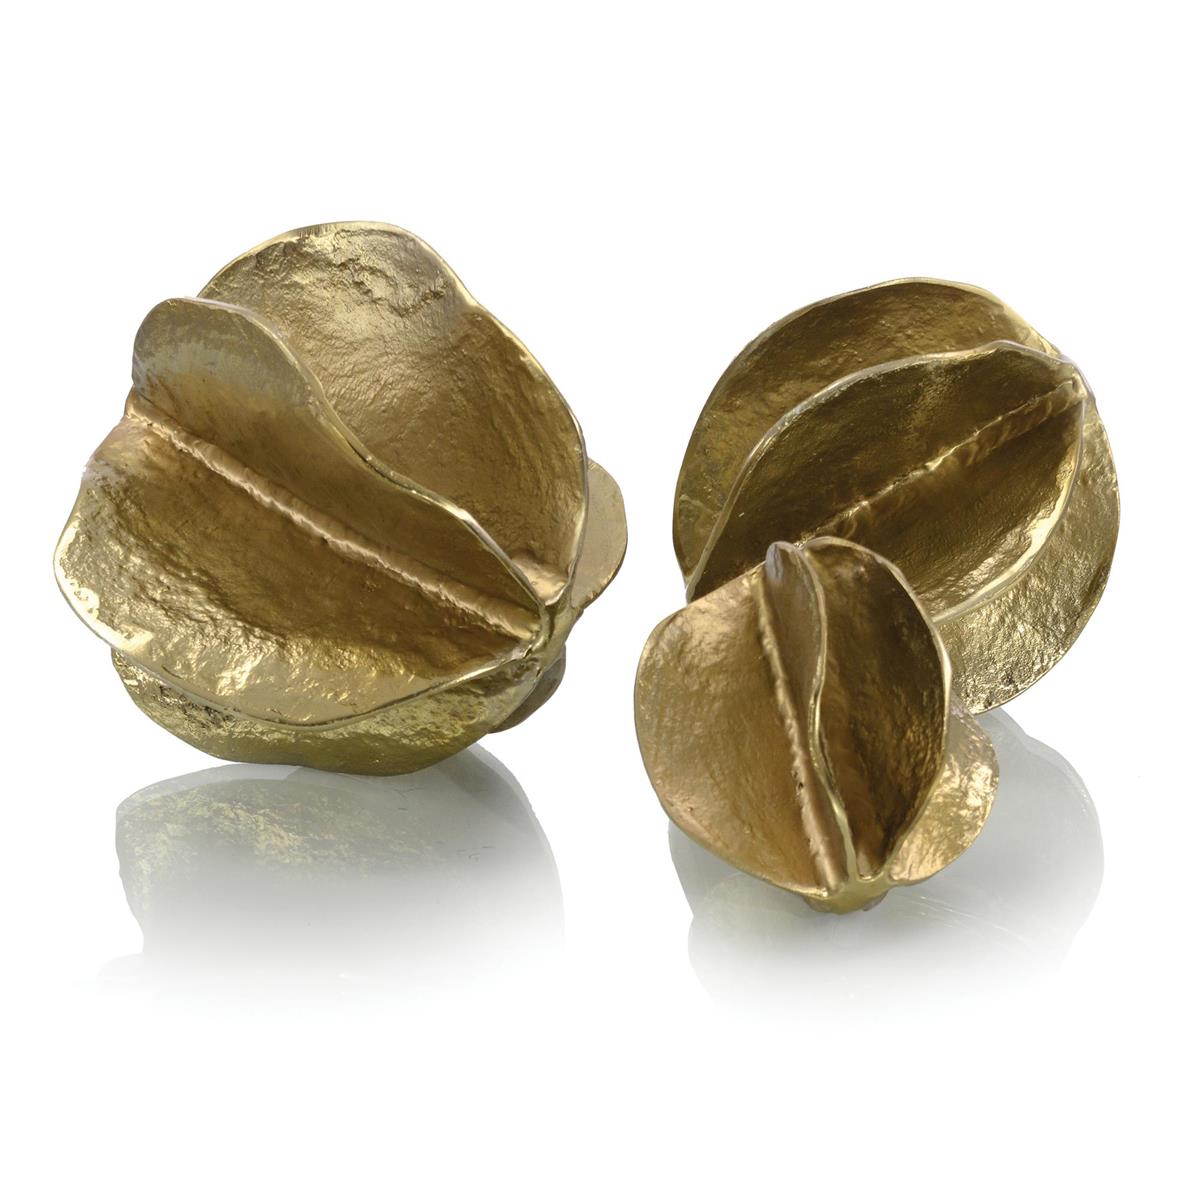 Set of Three Brass Spheres of Flowing Waves-John Richard-Sculptures & Objects-Artistic Elements